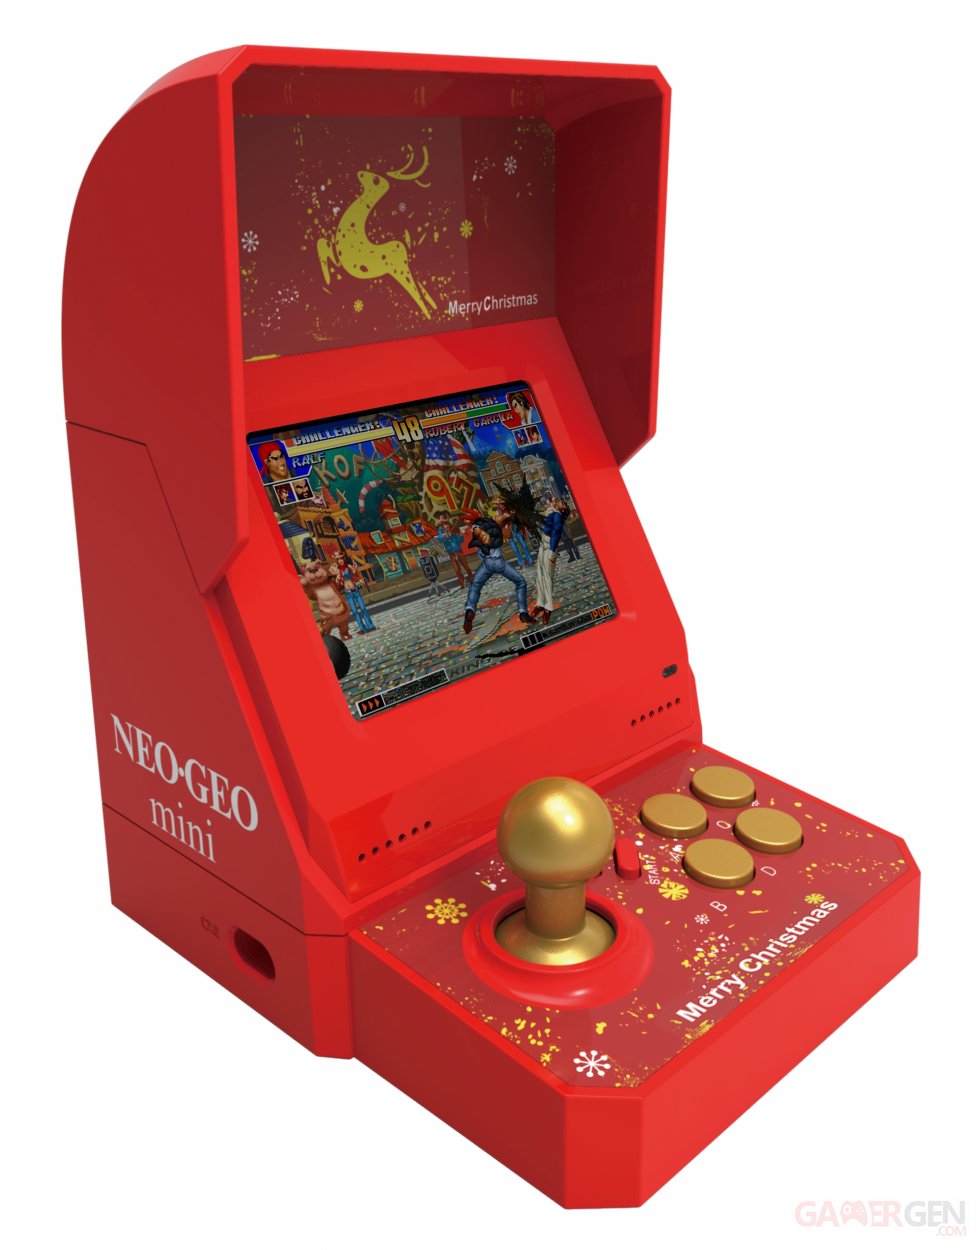 Neo Geo christmas edition noel images consoles (3)